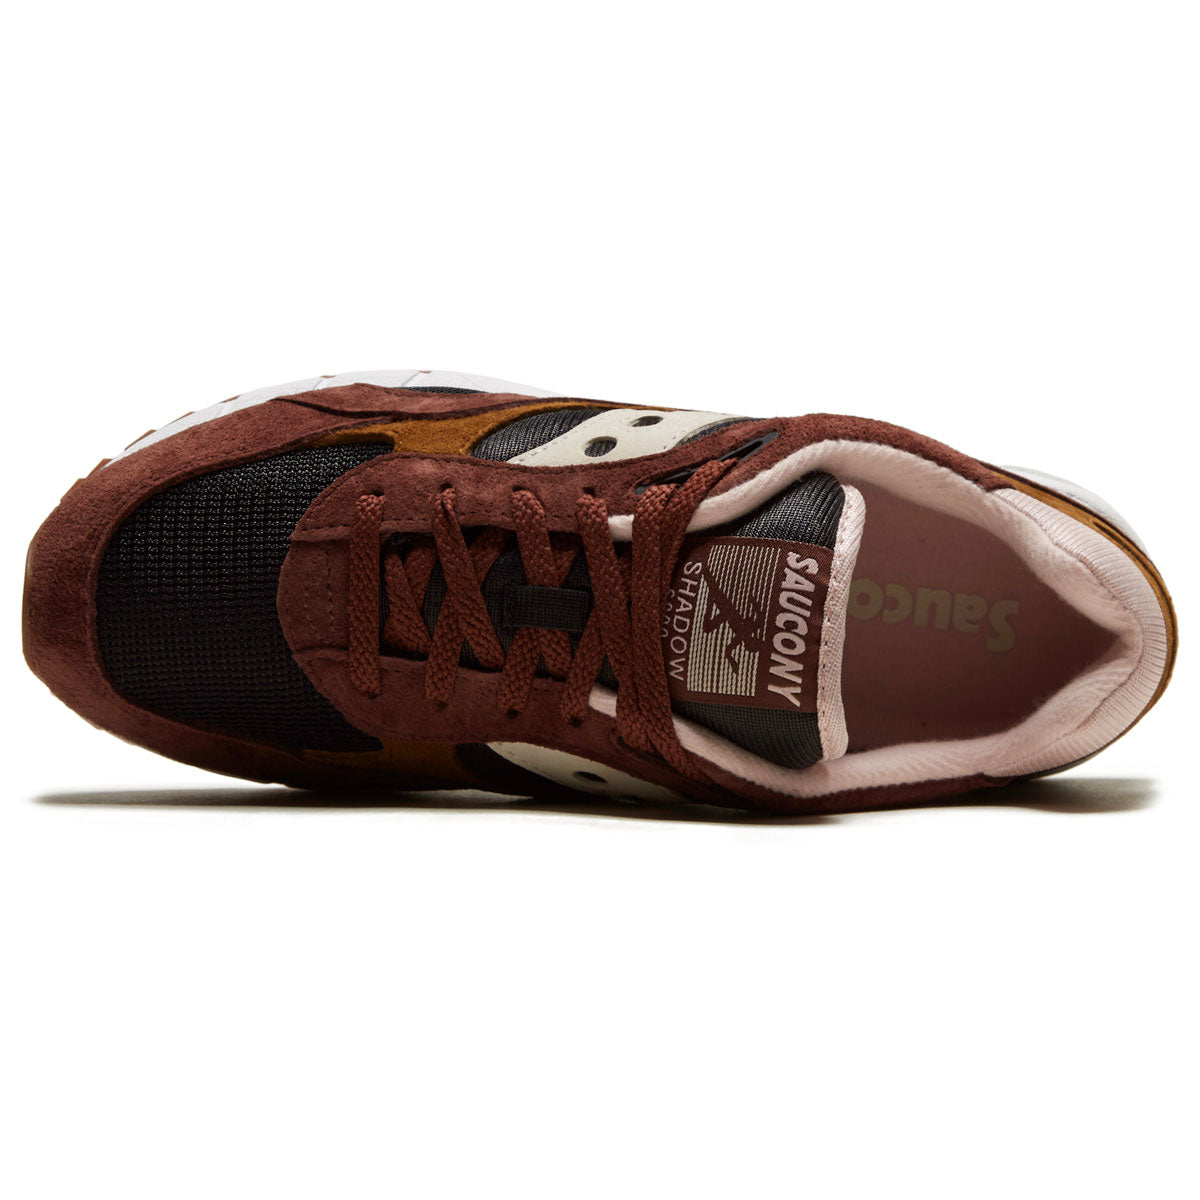 Saucony Shadow 6000 Shoes - Brown/Black image 3